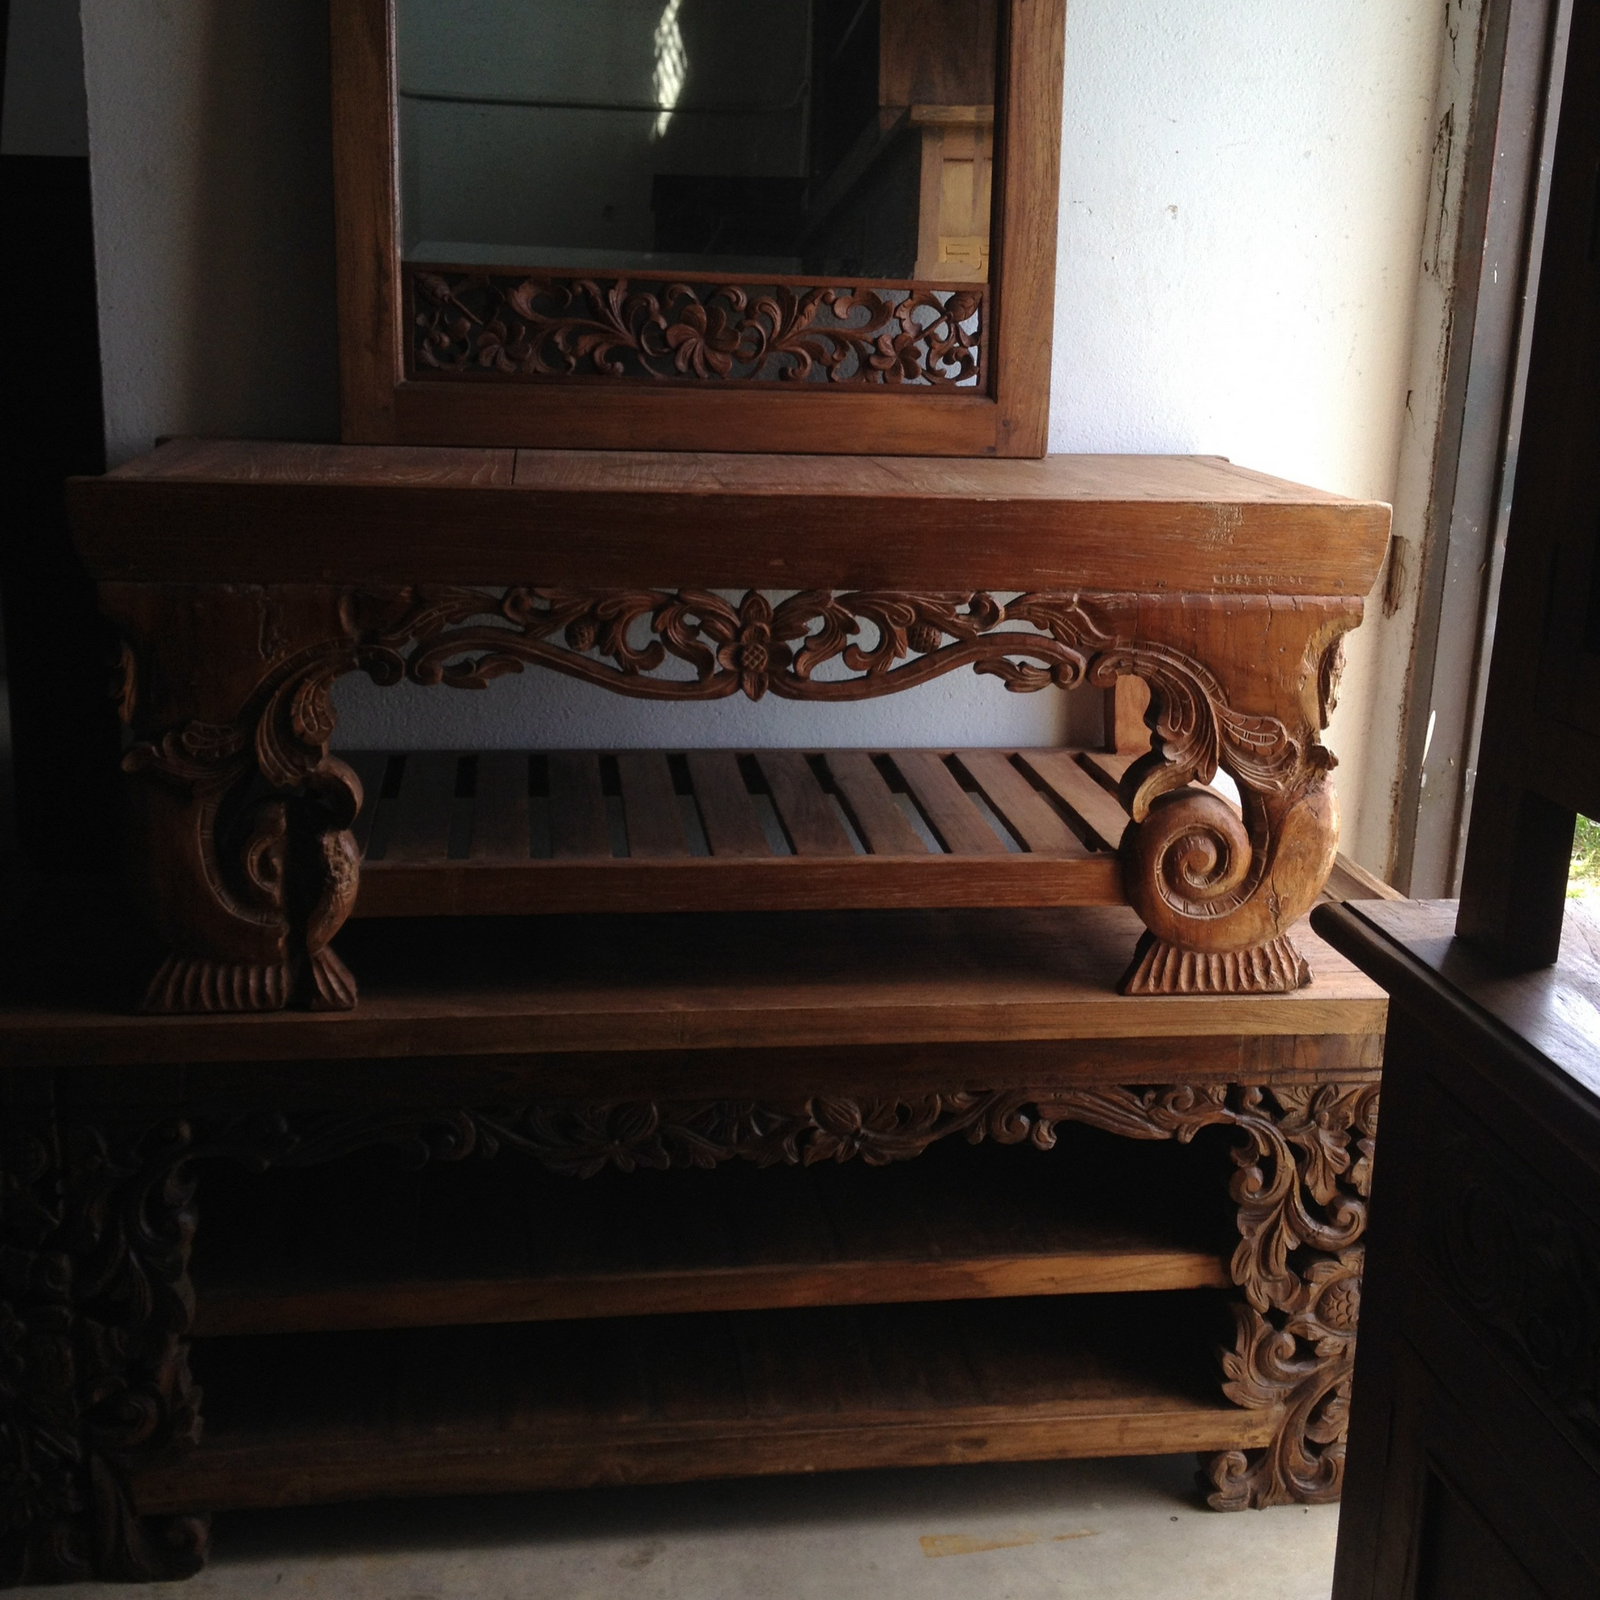 Furniture Wholesaler Indonesia: Providing High Quality Pieces At Competitive Prices